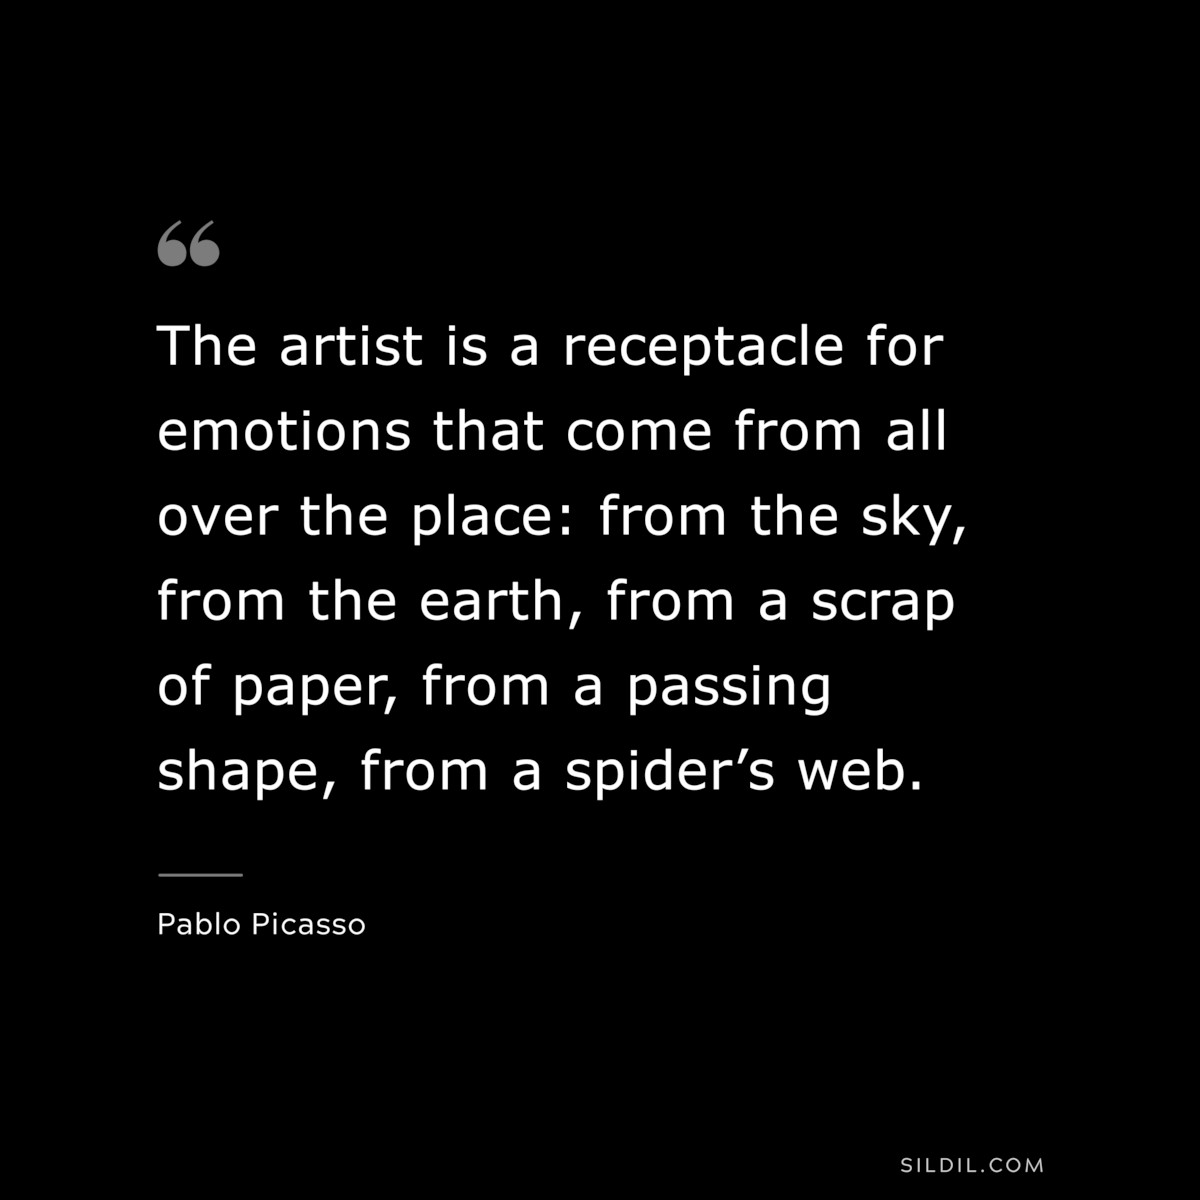 The artist is a receptacle for emotions that come from all over the place: from the sky, from the earth, from a scrap of paper, from a passing shape, from a spider’s web. ― Pablo Picasso